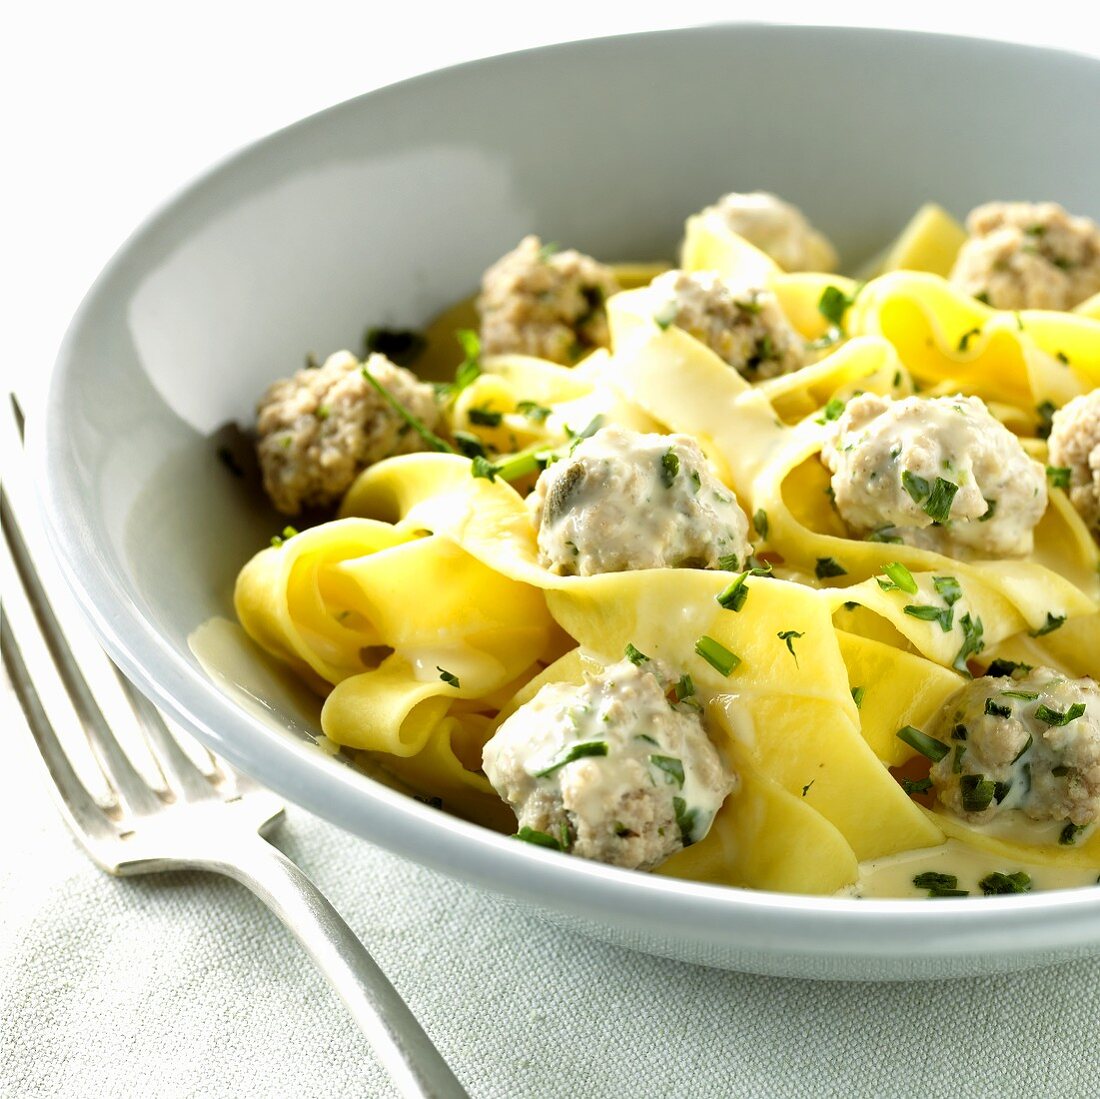 Veal meatballs with ribbon pasta in cream sauce